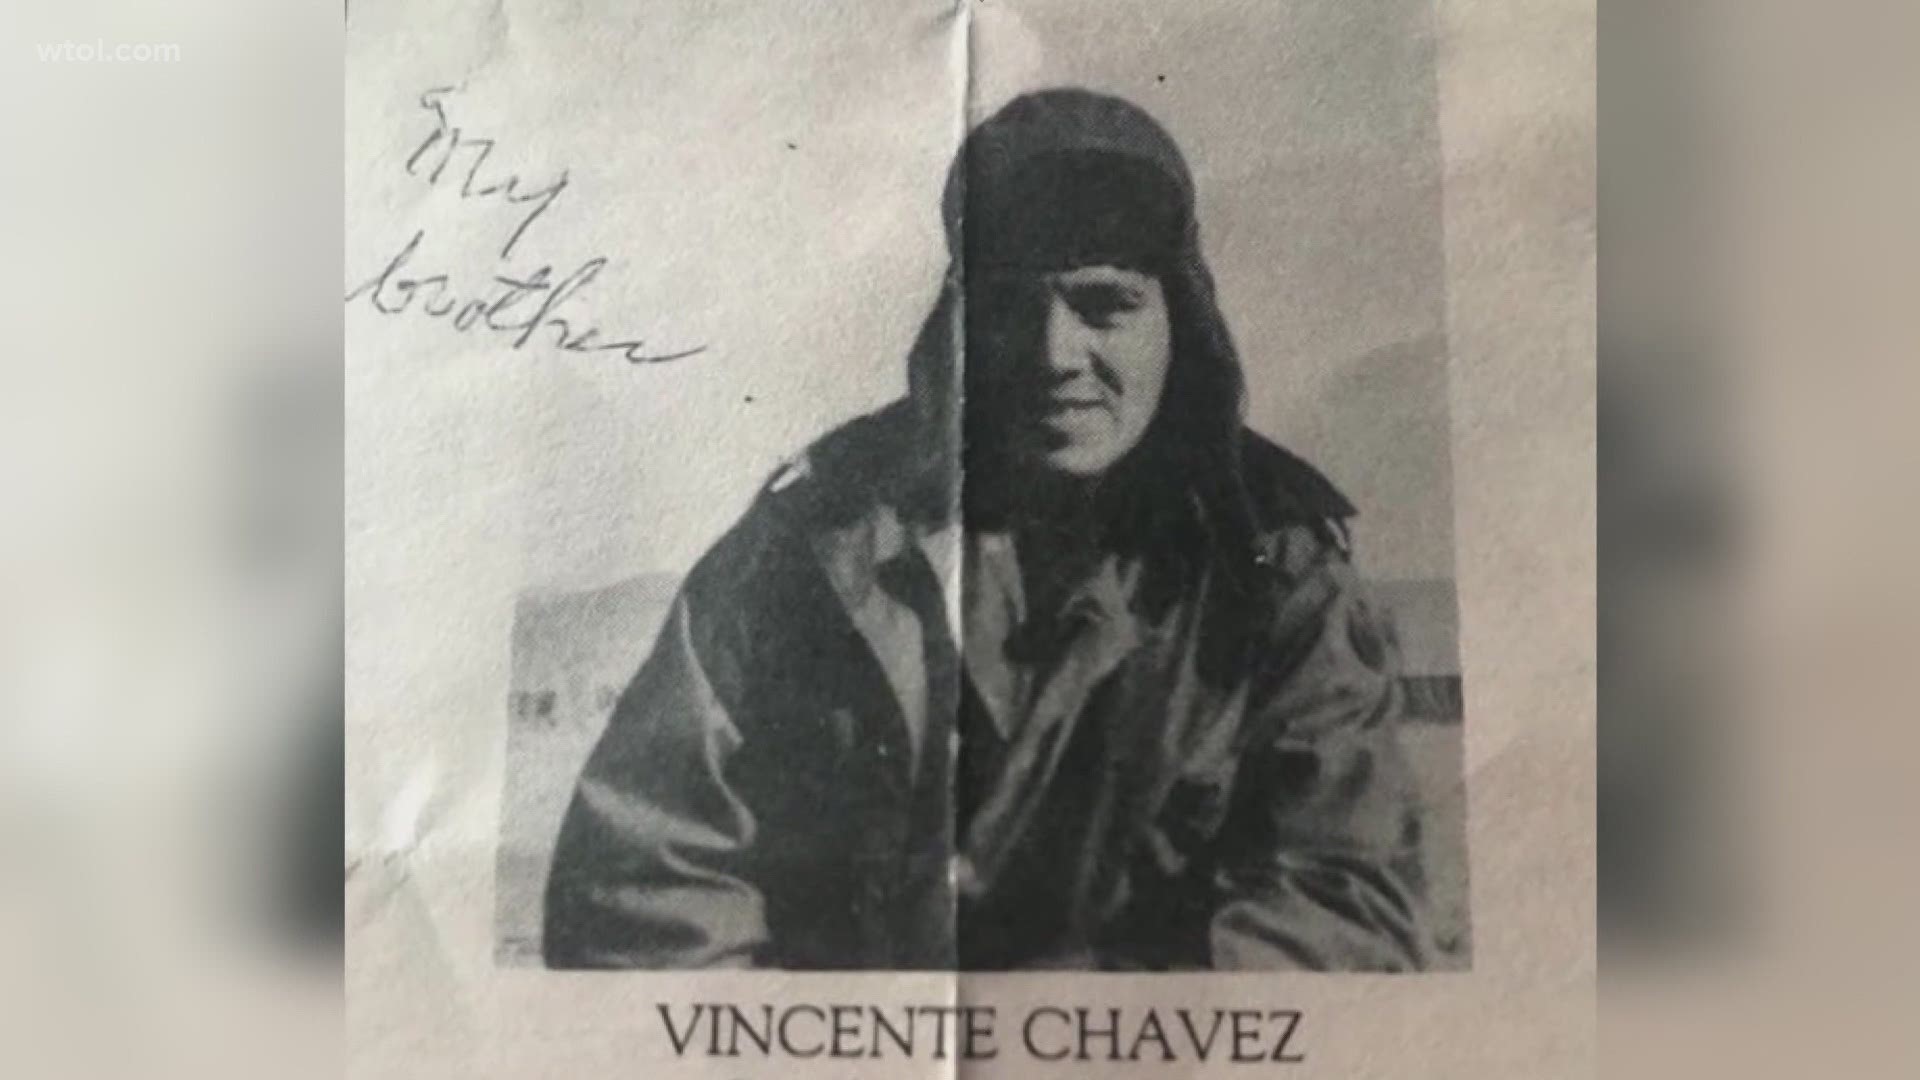 Vincent Chavez was 26 when he was killed in action during the Korean War. He never met his daughter. 68 years later, three generations honor him on Memorial Day.